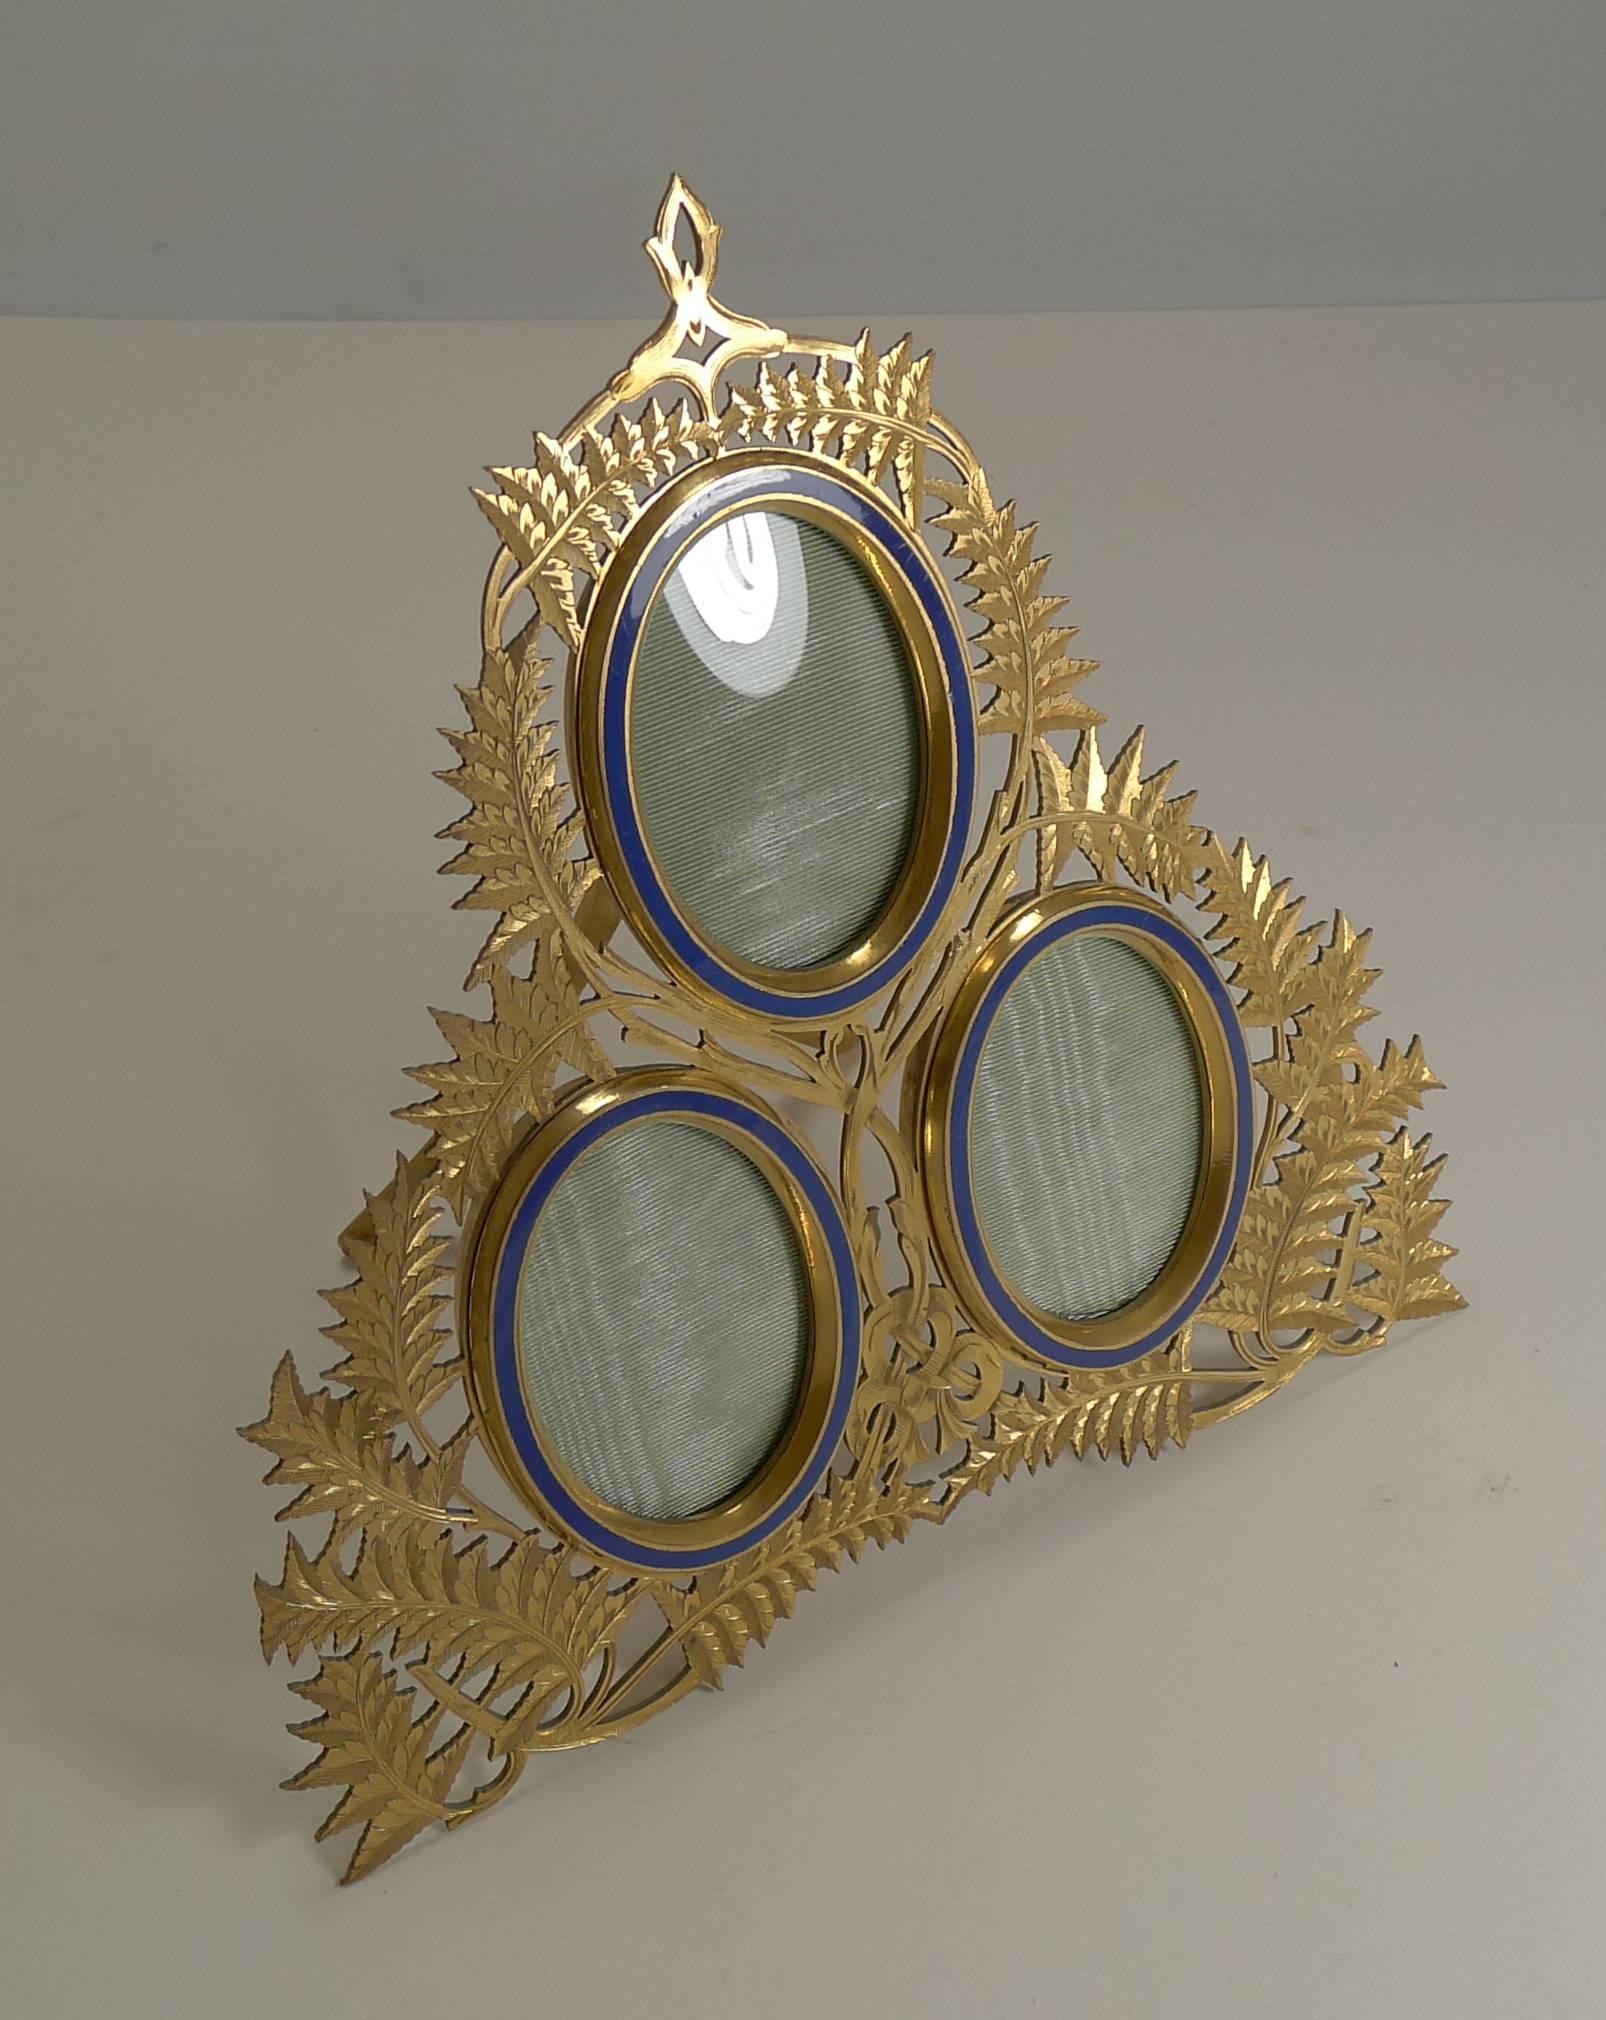 A beautiful quality triple photograph frame, cast with a myriad of Fern motifs, very English and very Victorian, and today, highly sought-after.

Cast in bronze, the frame retains the original gilded (gold) finish, in excellent condition. The